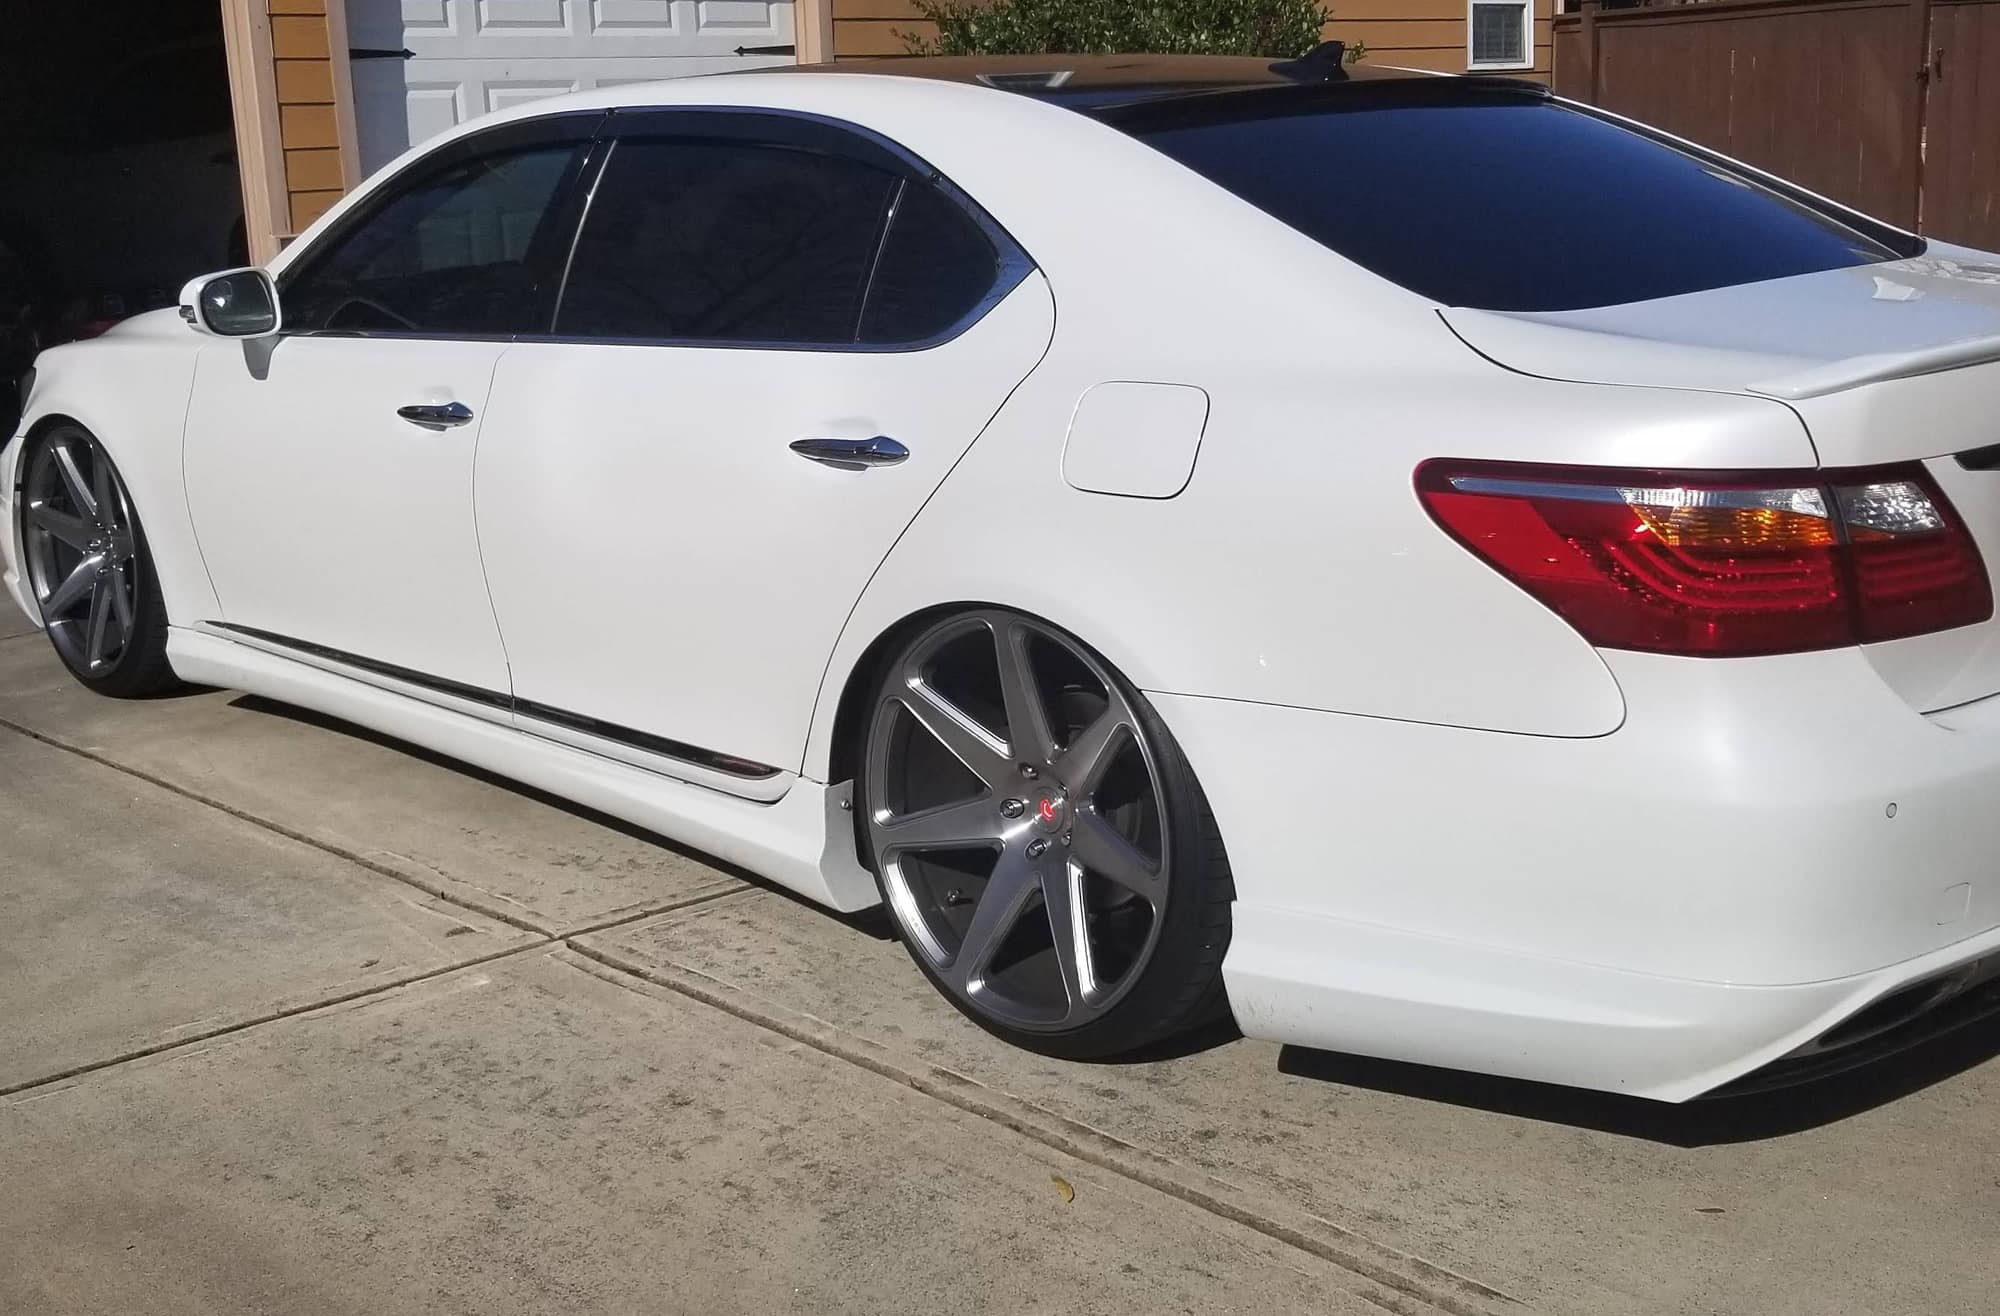 Wheels and Tires/Axles - FS: Vossen CG-207 Forged Wheels 22x9.5/22x11 w/tires - Used - 2007 to 2017 Lexus LS460 - 2018 to 2021 Lexus LC500 - Atlanta, GA 30128, United States